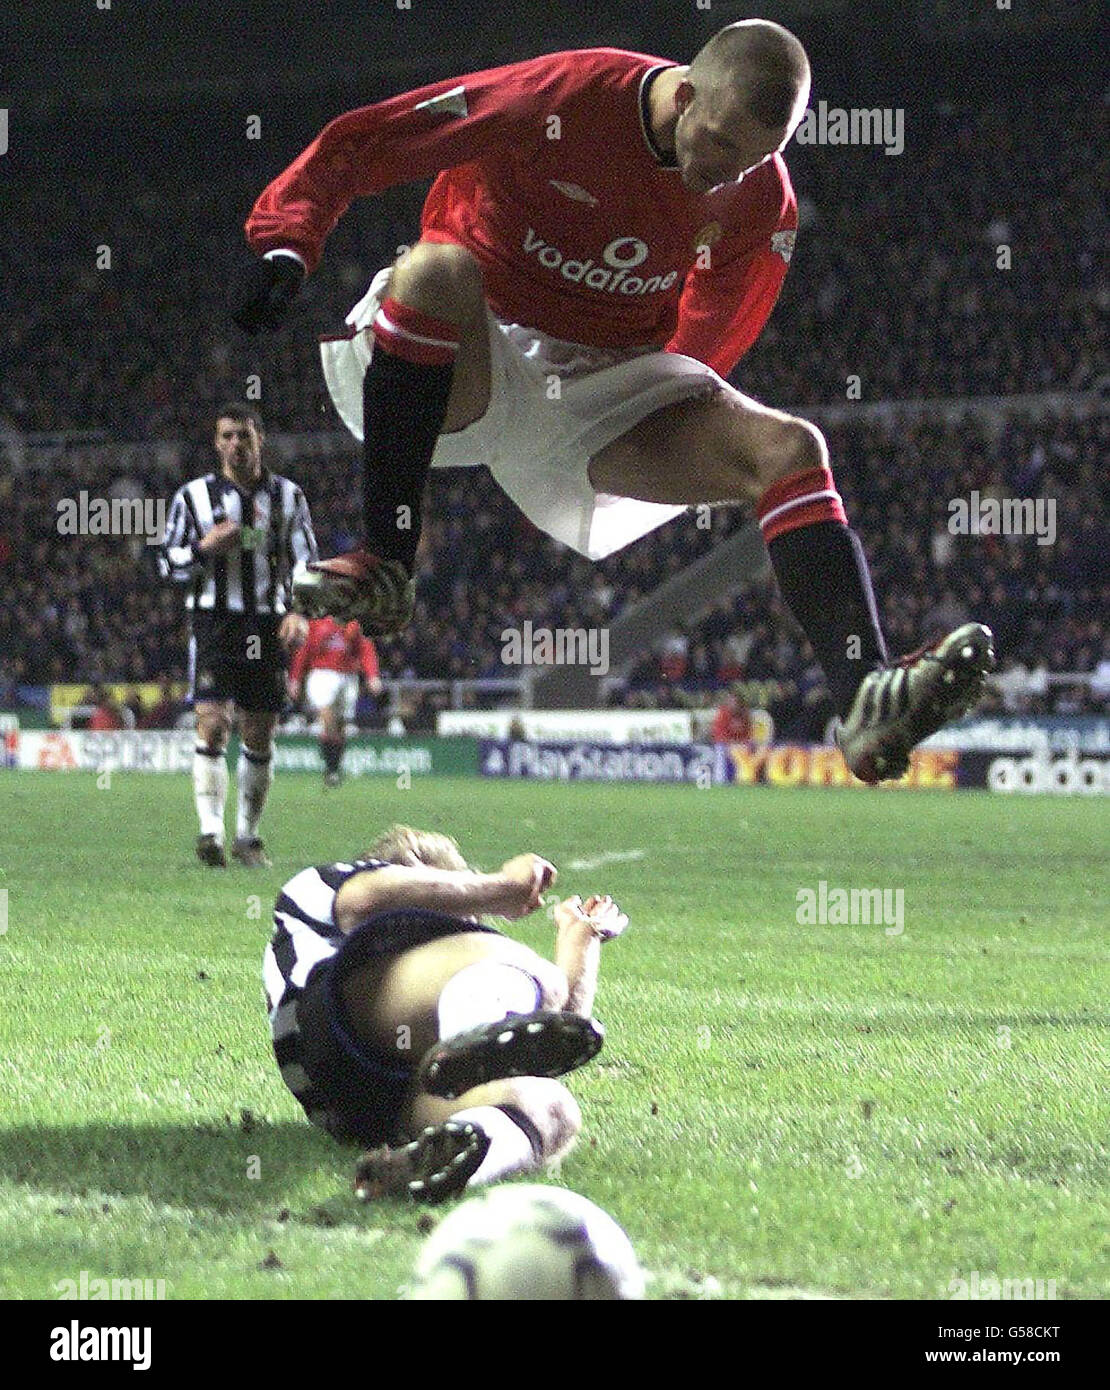 Manchester United's David Beckham (centre) jumps high to clear Newcastle United's Warren Barton during the Premiership football match at St James' Park. Stock Photo